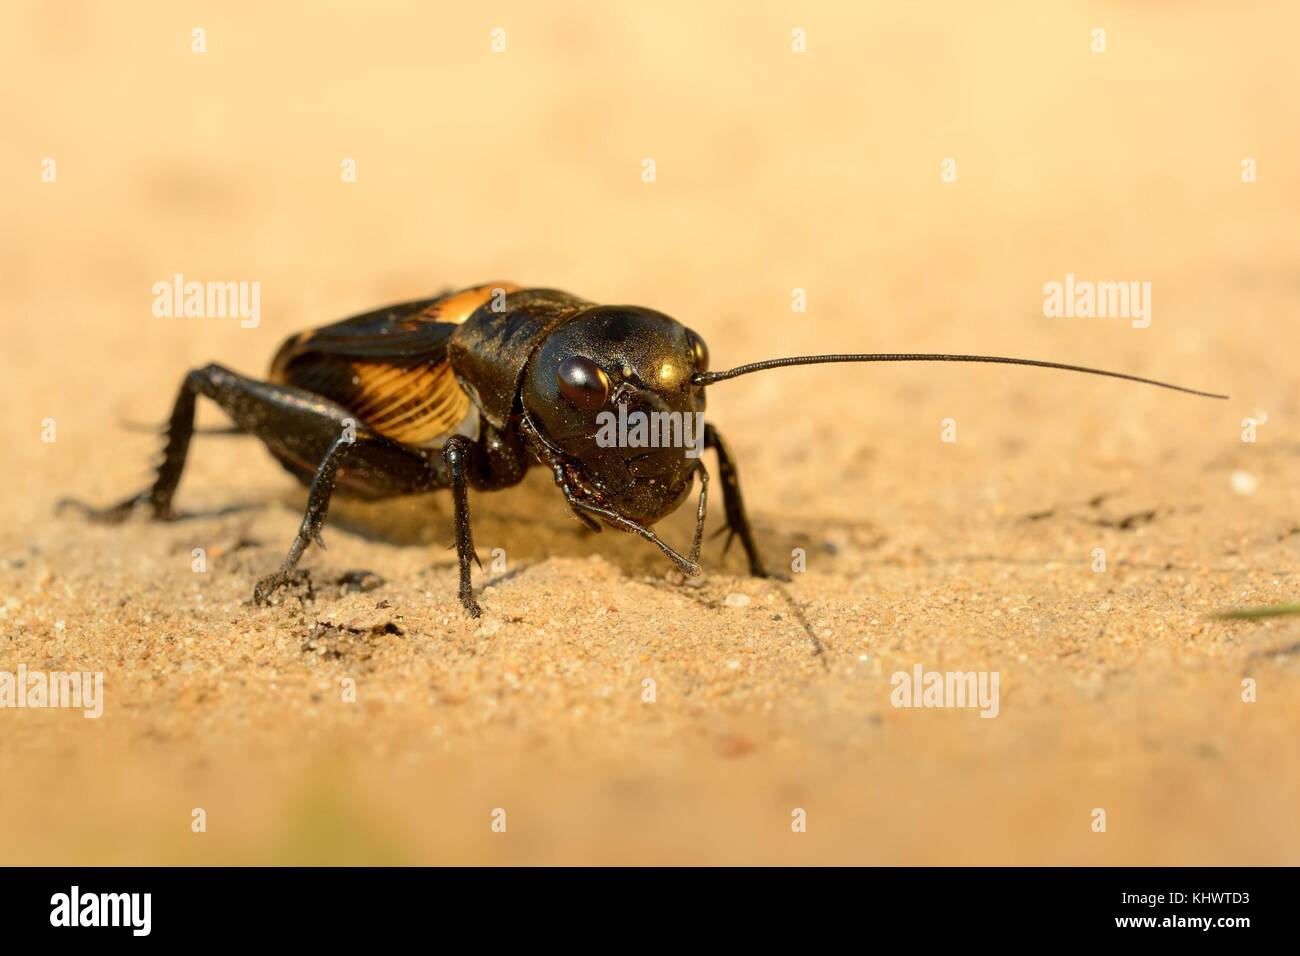 The field cricket - Gryllus campestris on the eath. Black cricket on the brown bright clay. Stock Photo